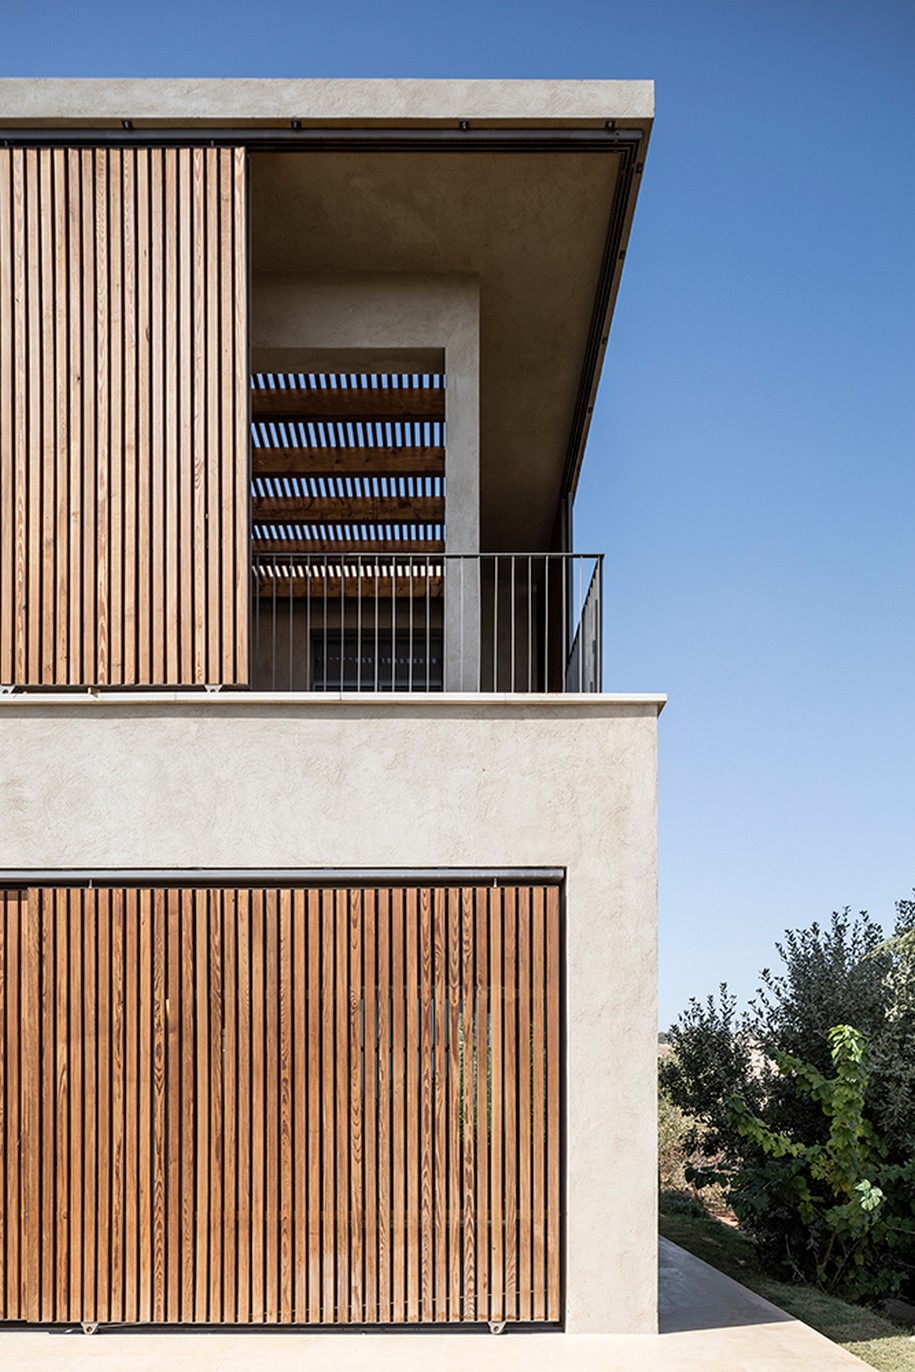 Archisearch Residence in the Galilee by Golany Architects aims to integrate into the pastoral surroundings